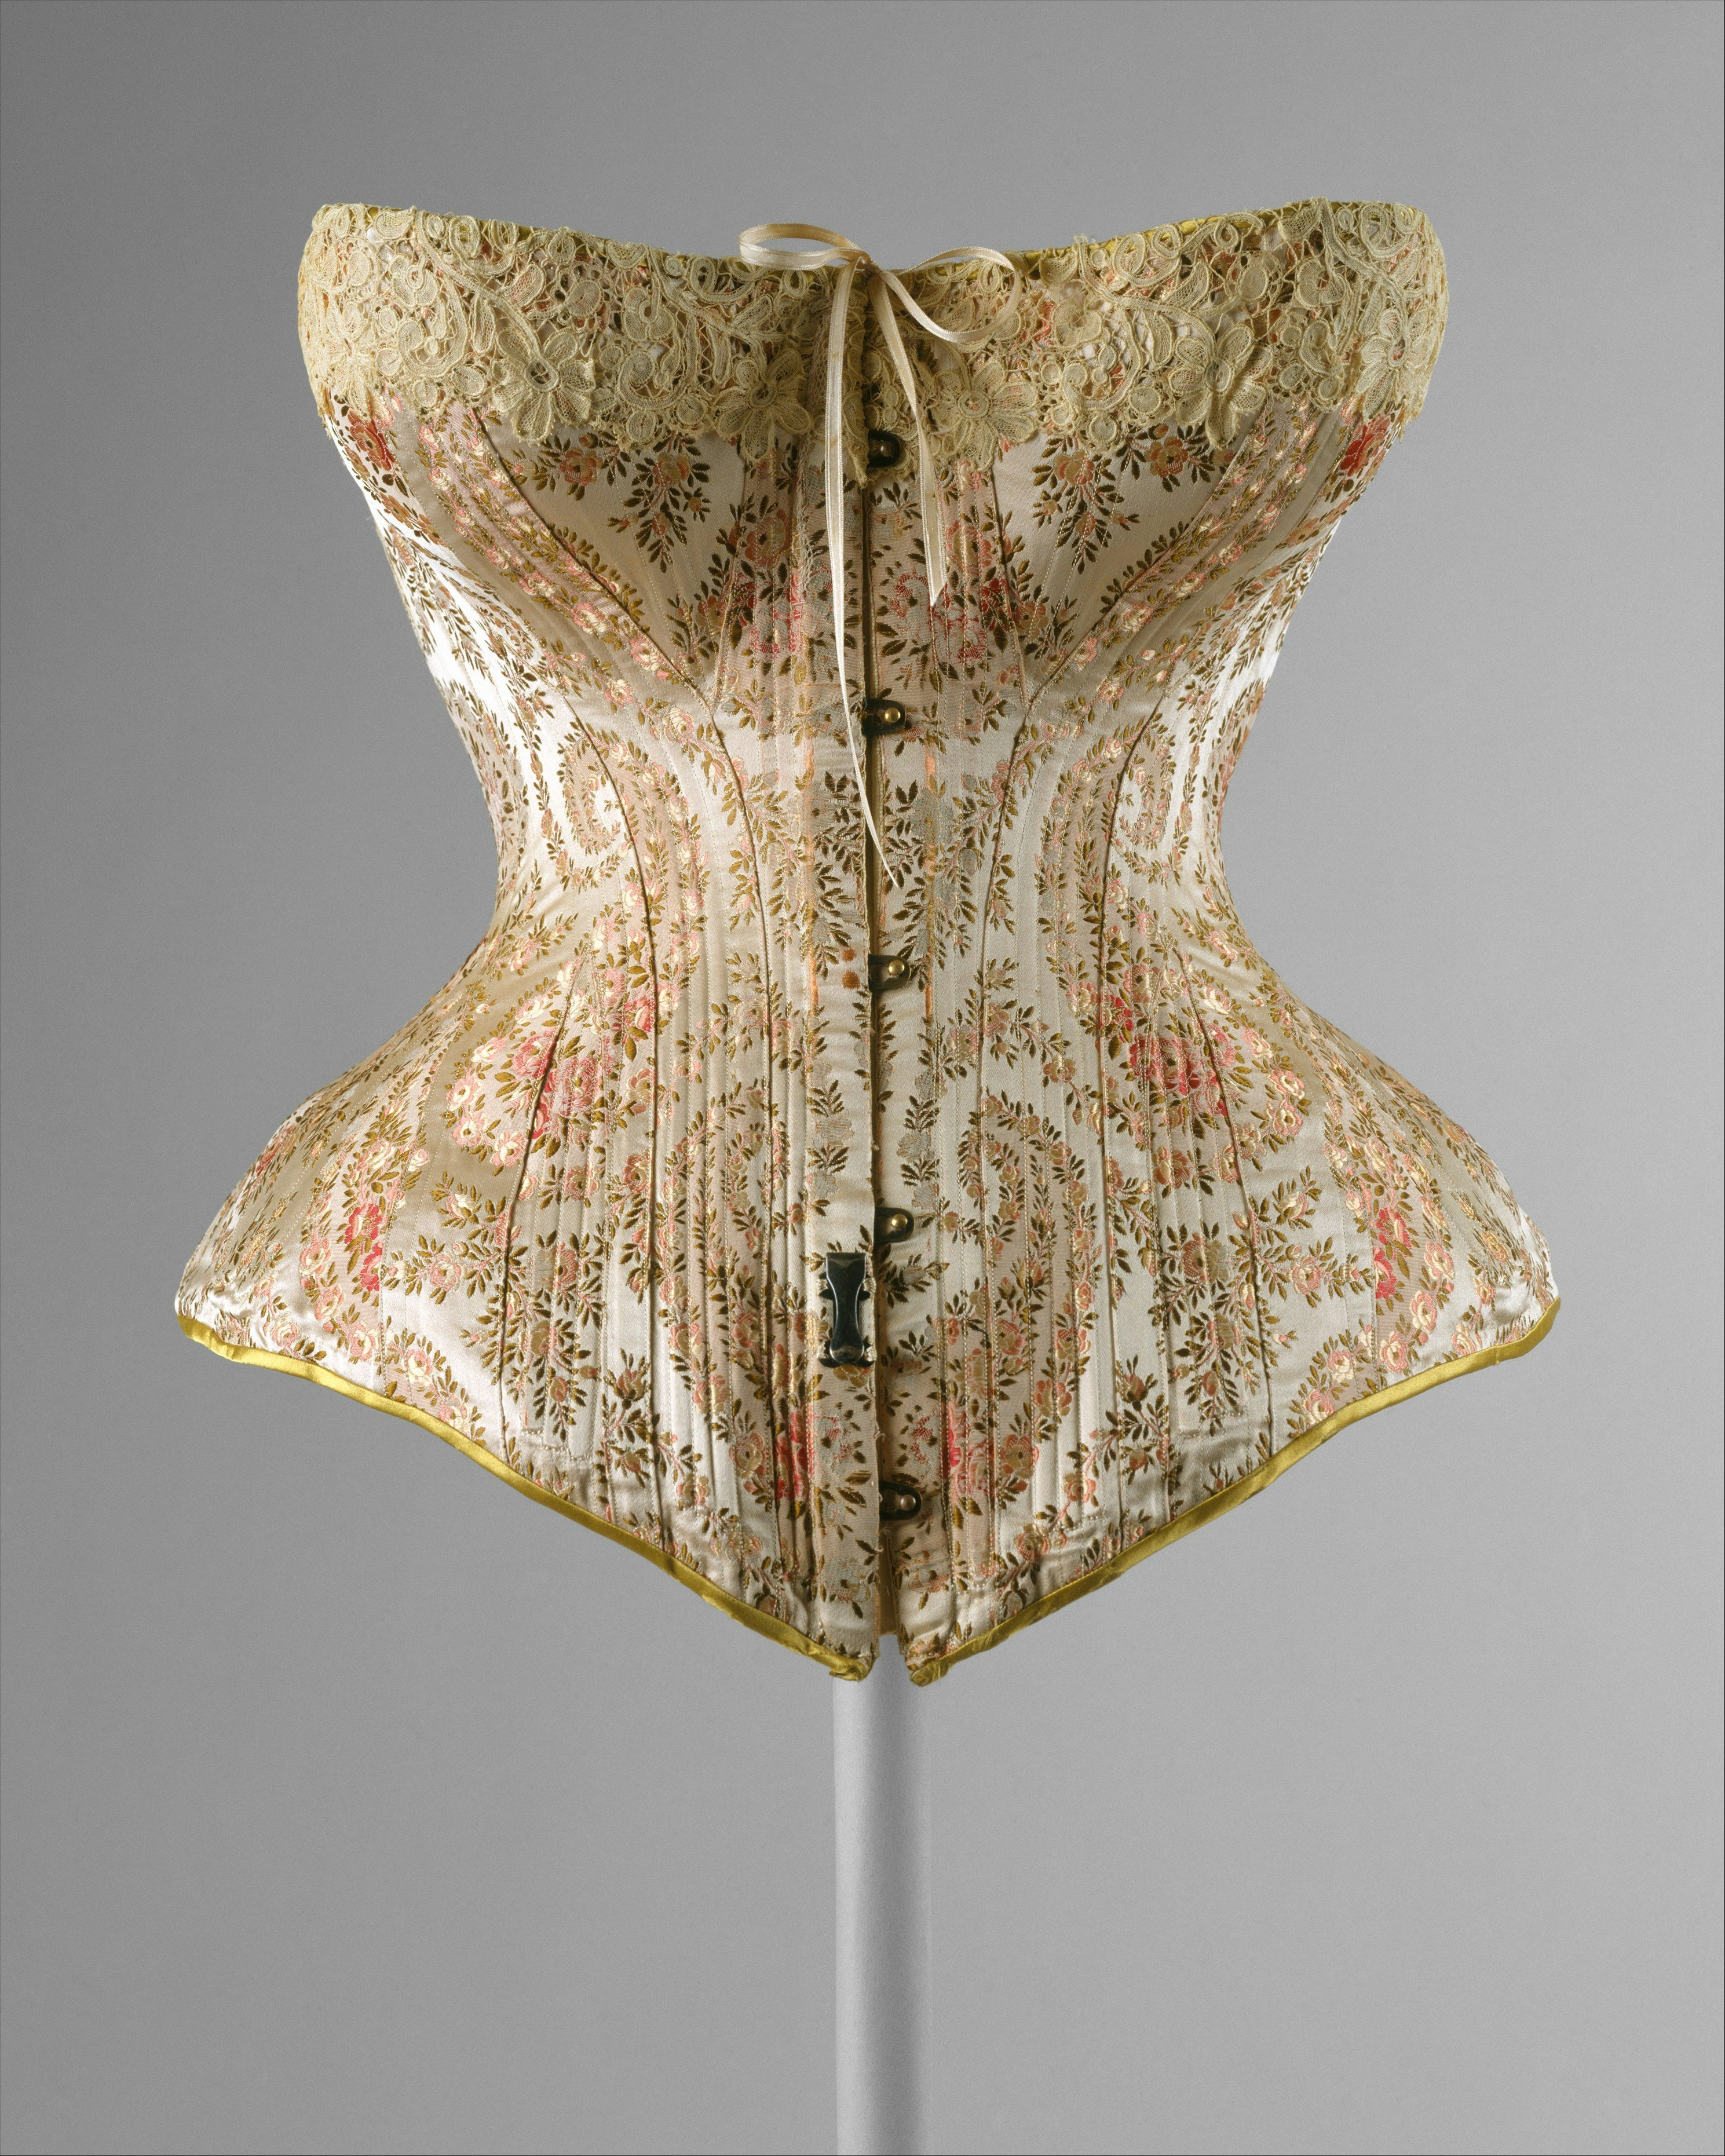 The History Of Corsets Is Probably More Complicated Than You Think